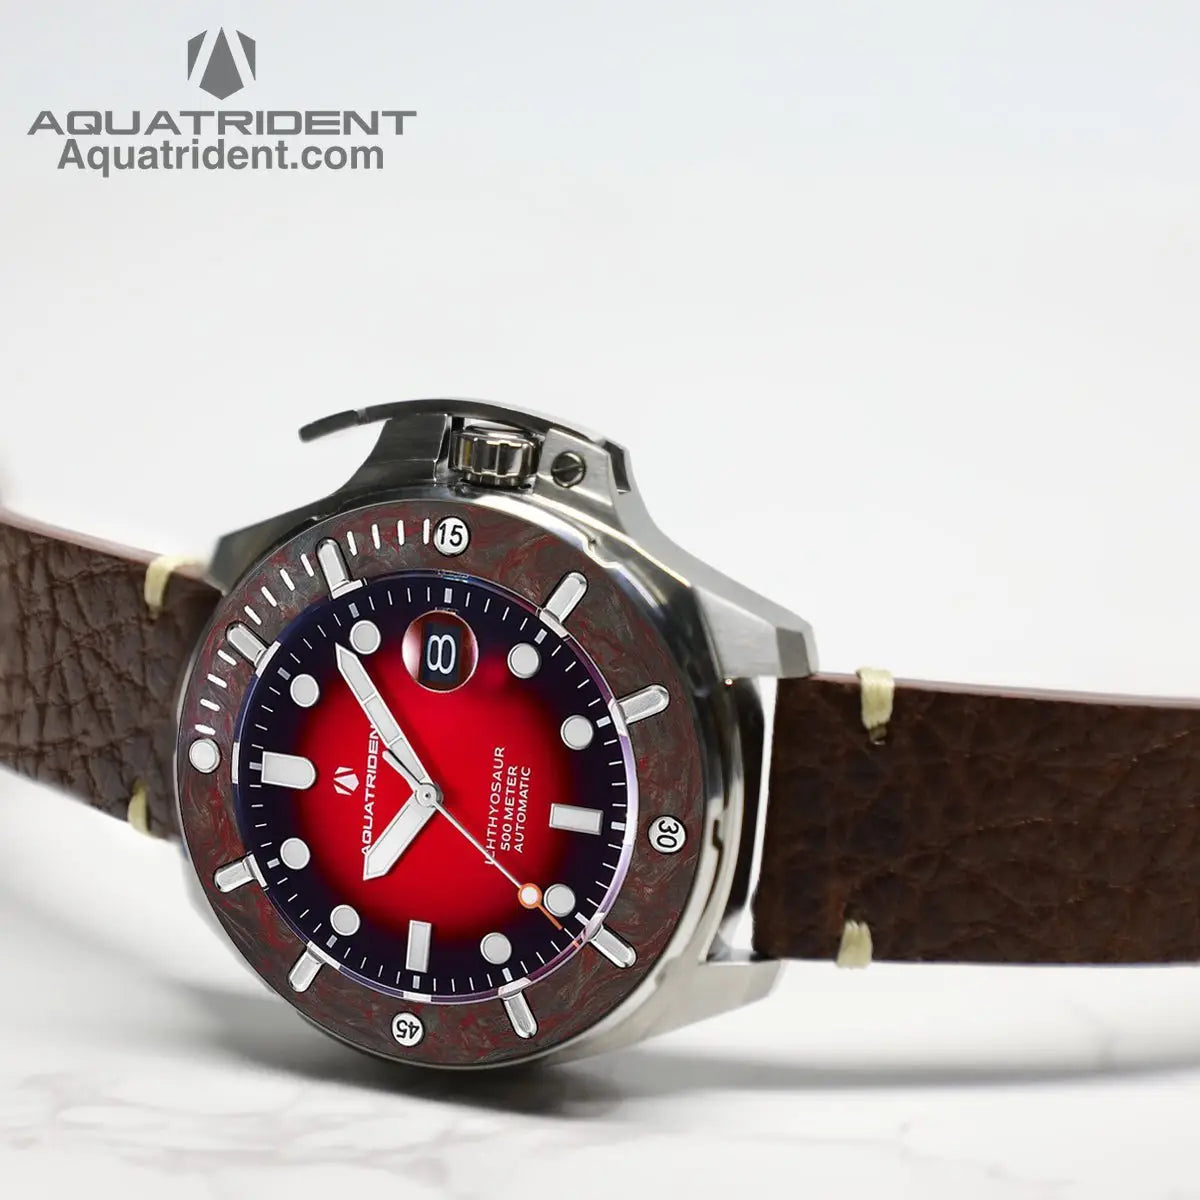 steel case-brown red marbled carbon fiber bezel-black and red dail-brown genuine leather strap-watch